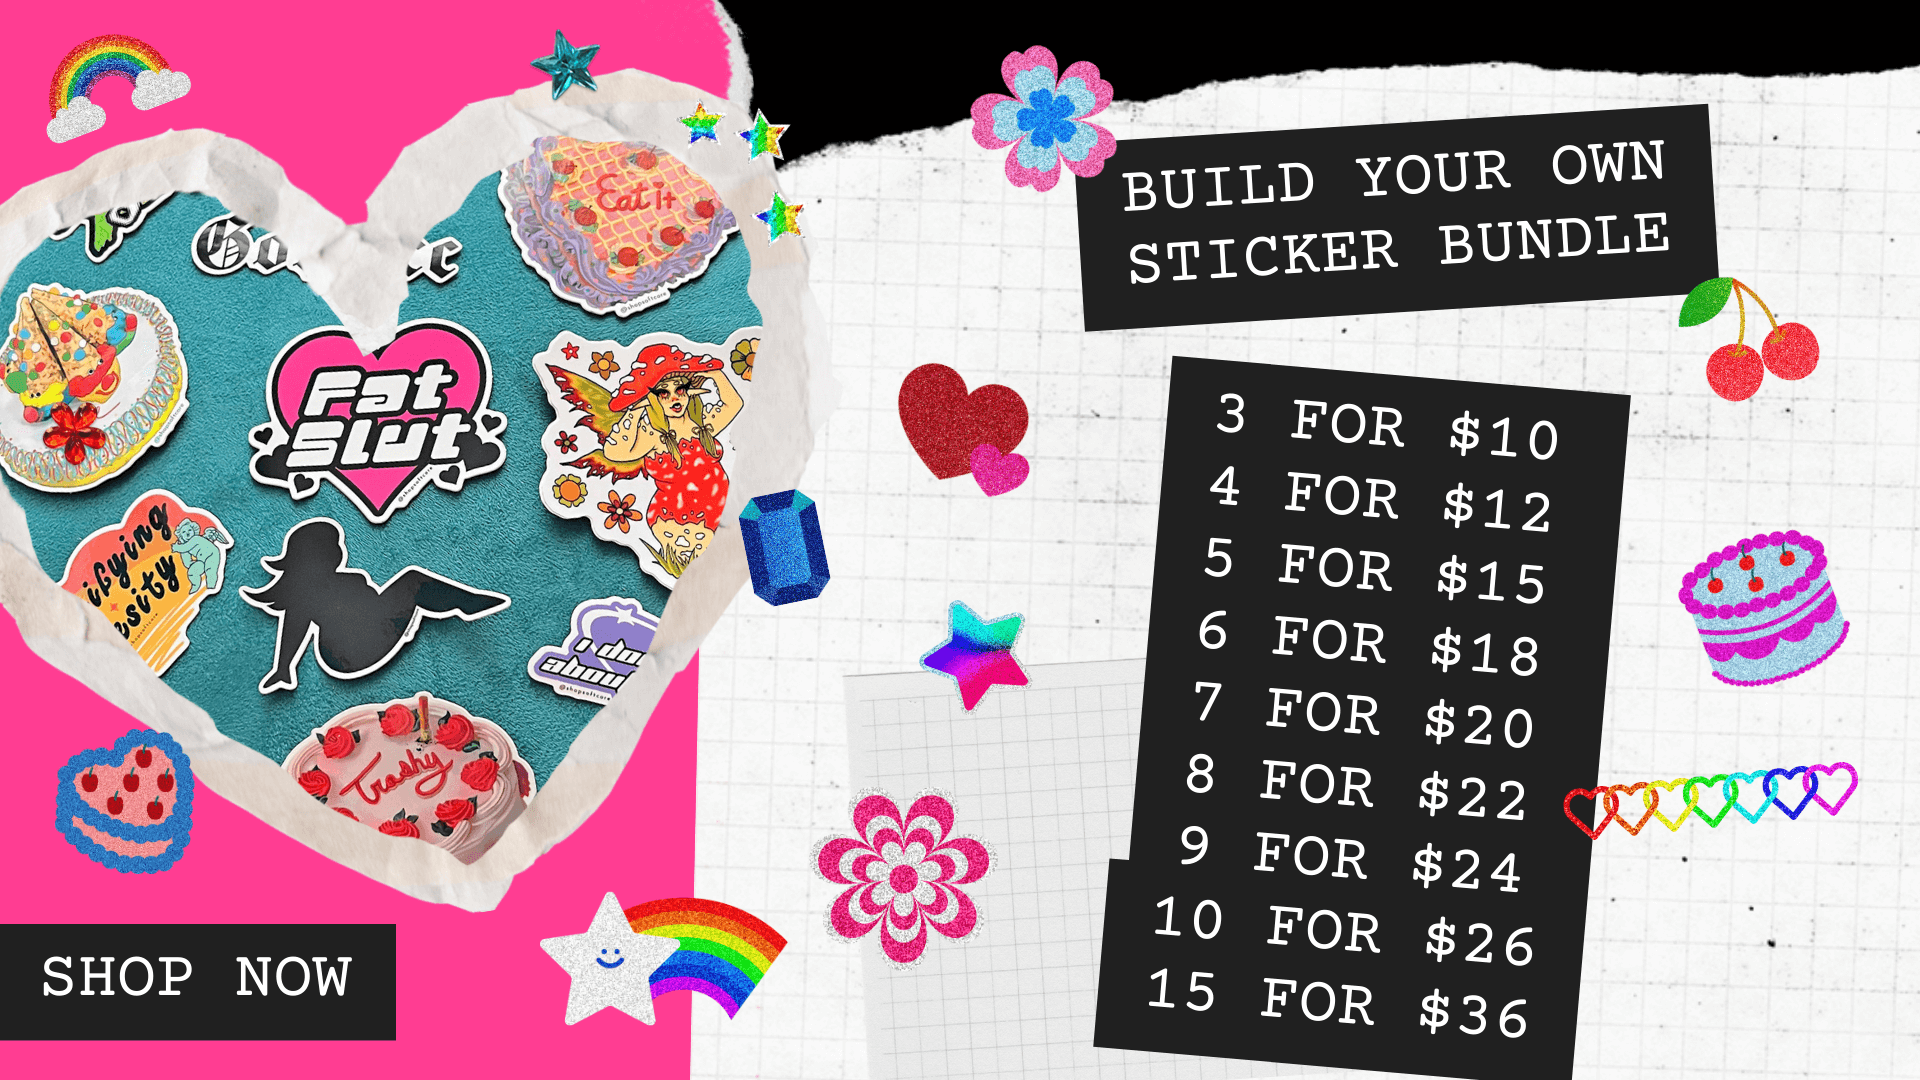 Build your own sticker bundle. 3 for $10 4 for $12 5 for $15 6 for $18 7 for $20 8 for $22 9 for $24 10 for $26 15 for $36. Shop now. Click through to shop the bundle.